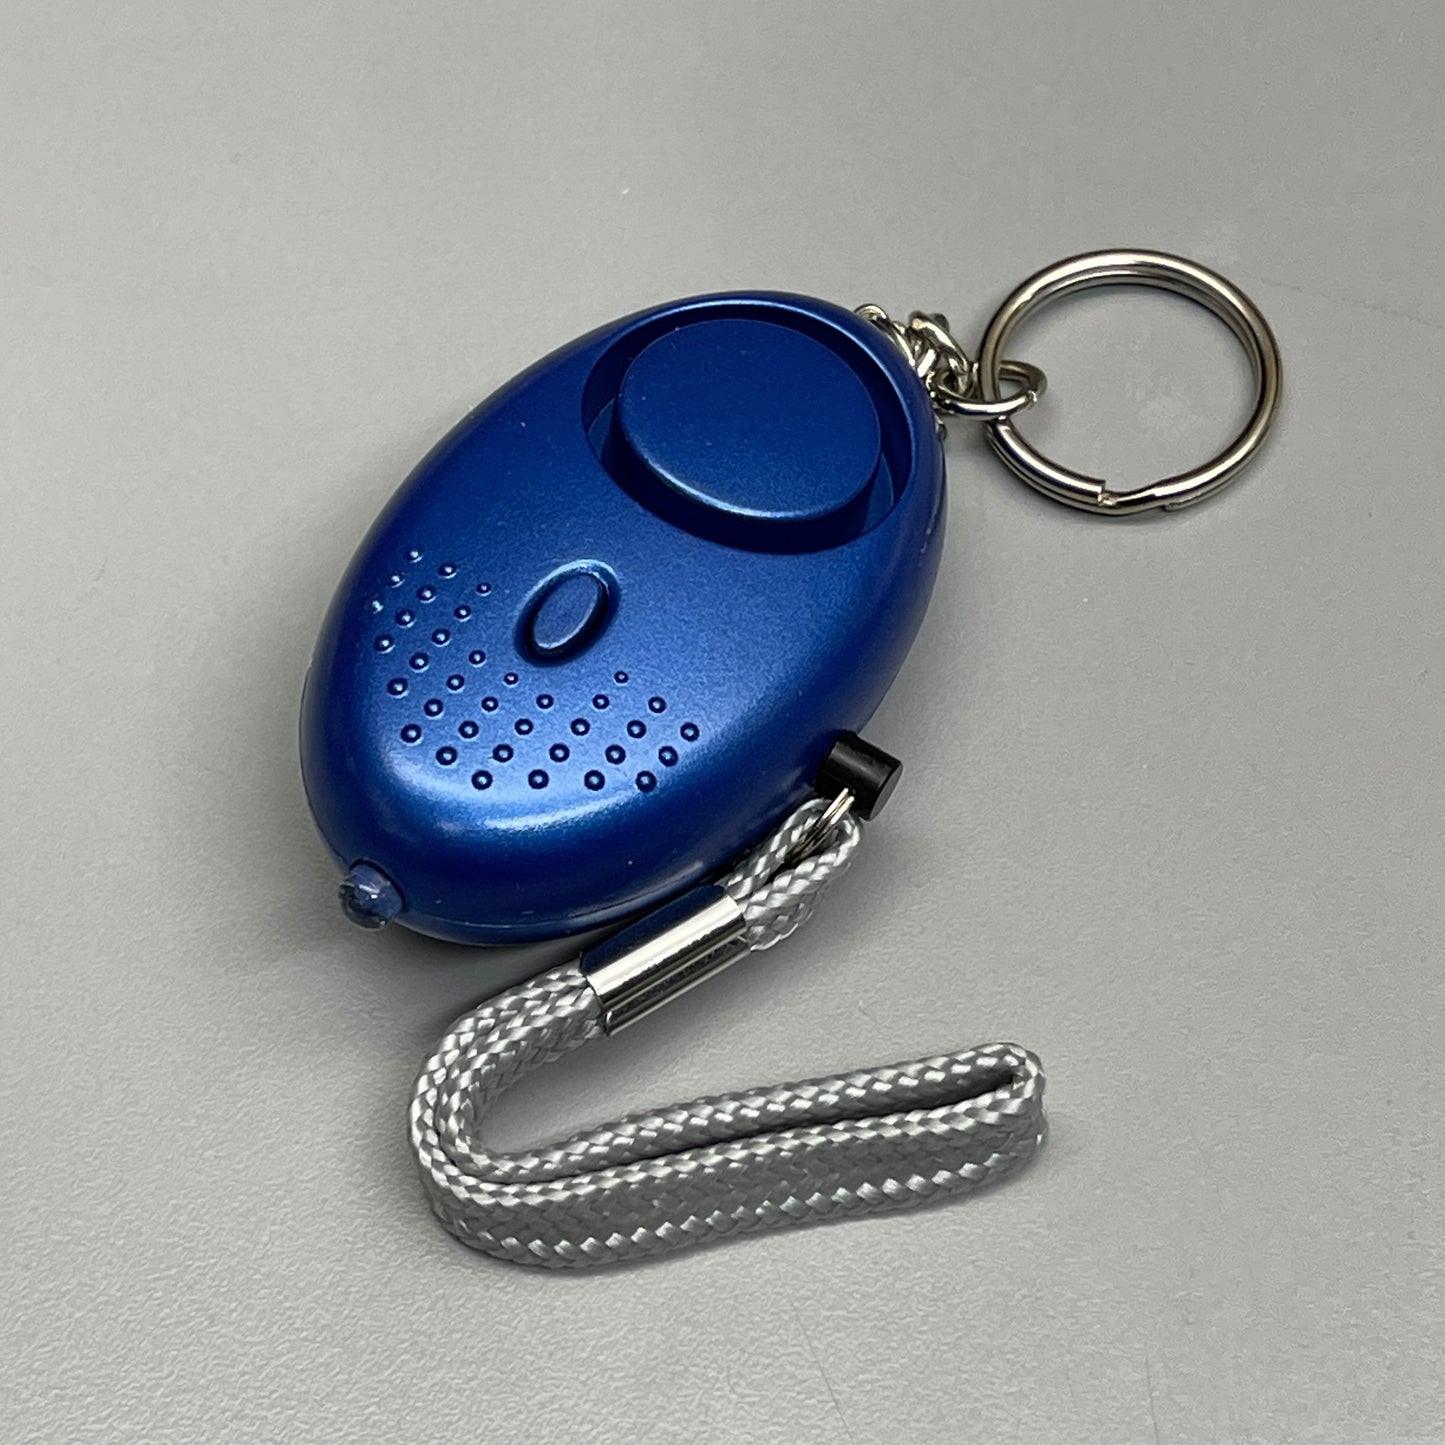 5-PACK! Personal Alarm Keychain Emergency Self Defense Alarm With LED Light Blue (New)